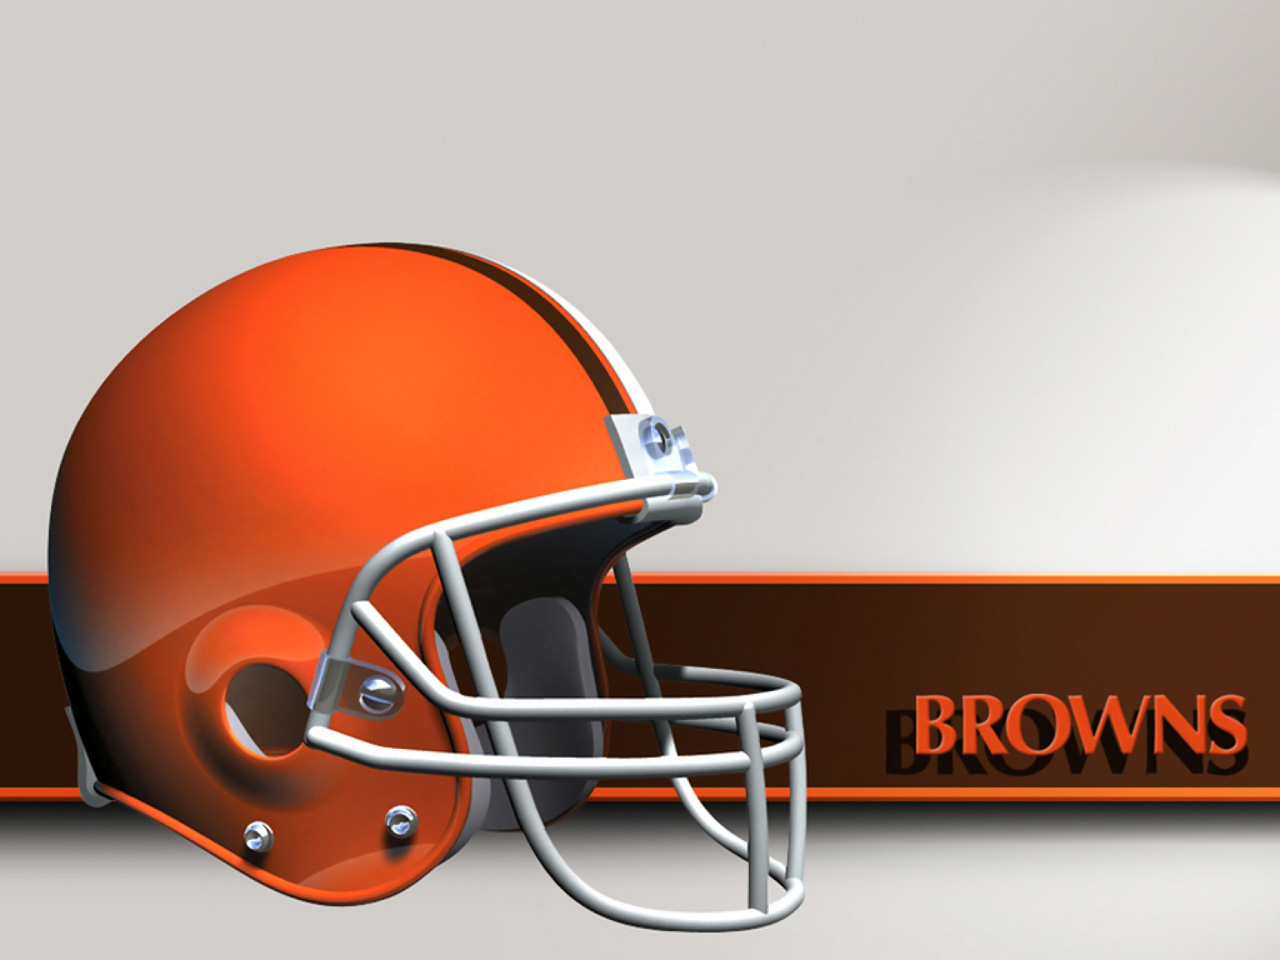 NFL Cleveland Browns Logo drawing free image download